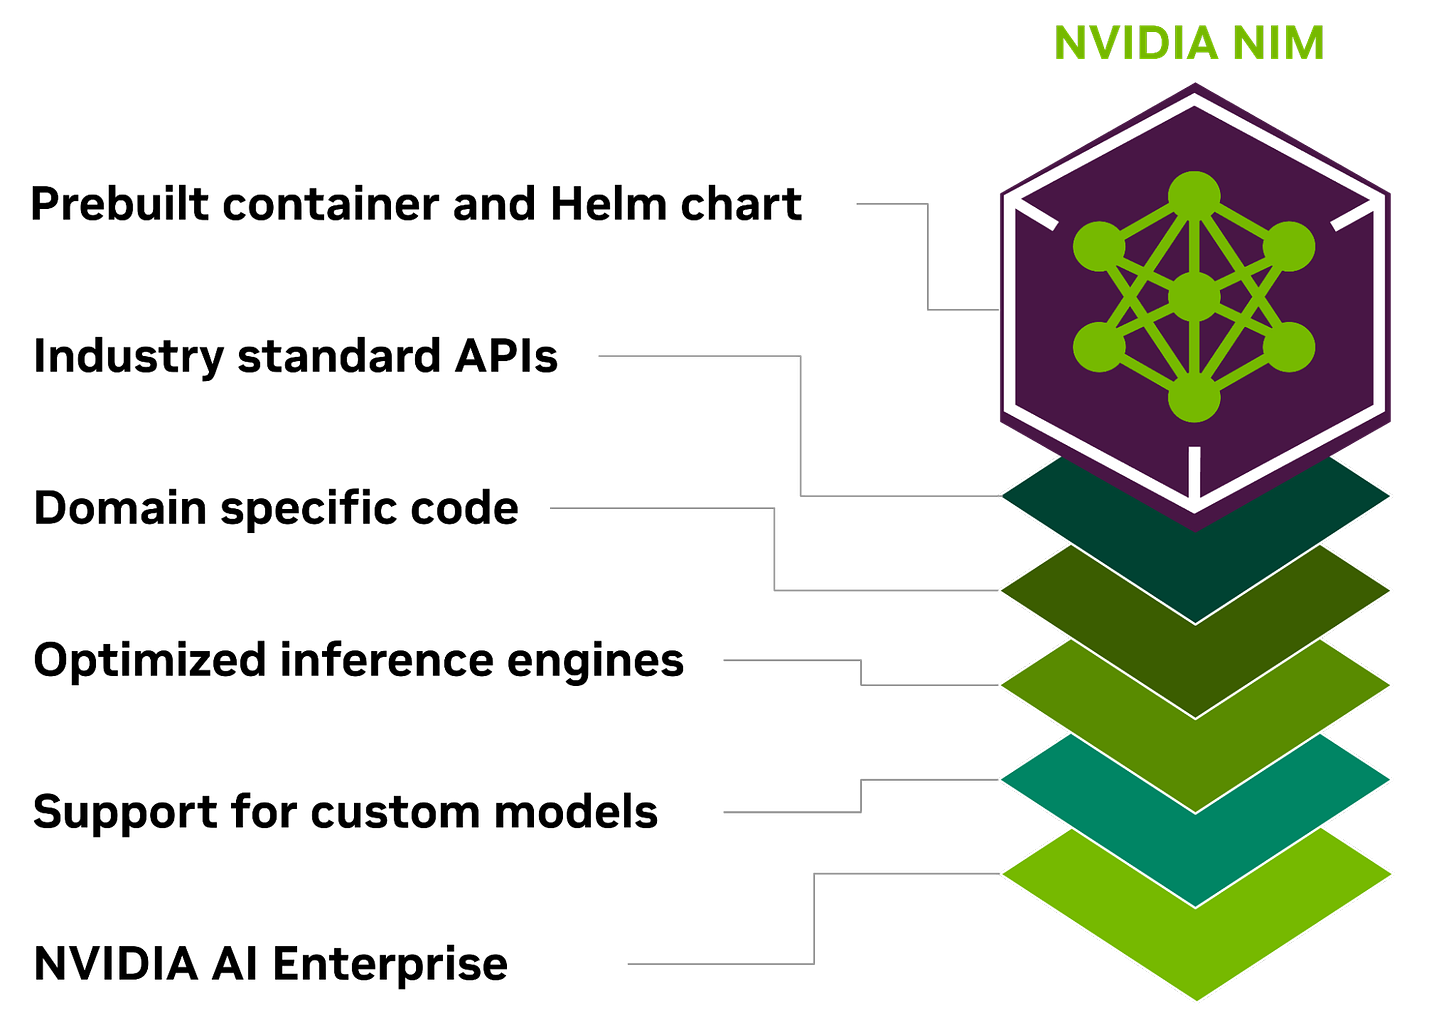 NVIDIA NIM Offers Optimized Inference Microservices for Deploying AI Models  at Scale | NVIDIA Technical Blog